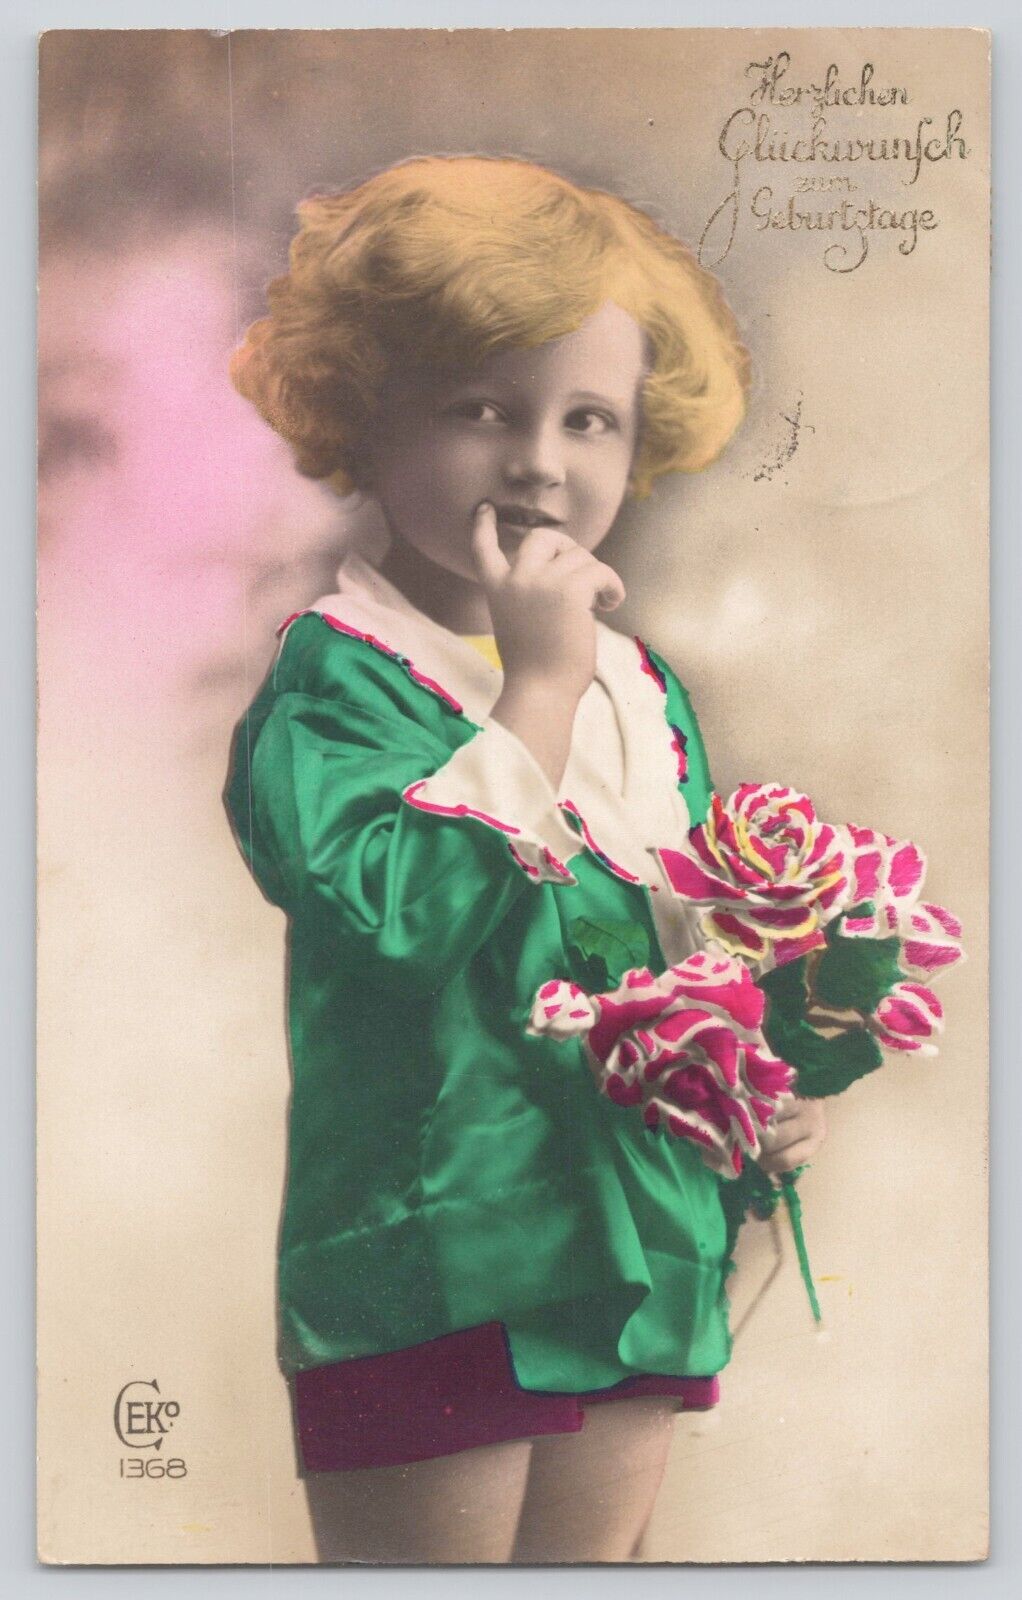 Postcard RPPC Birthday Girl Holding Flowers Hand Colored Embellished Cute c1933